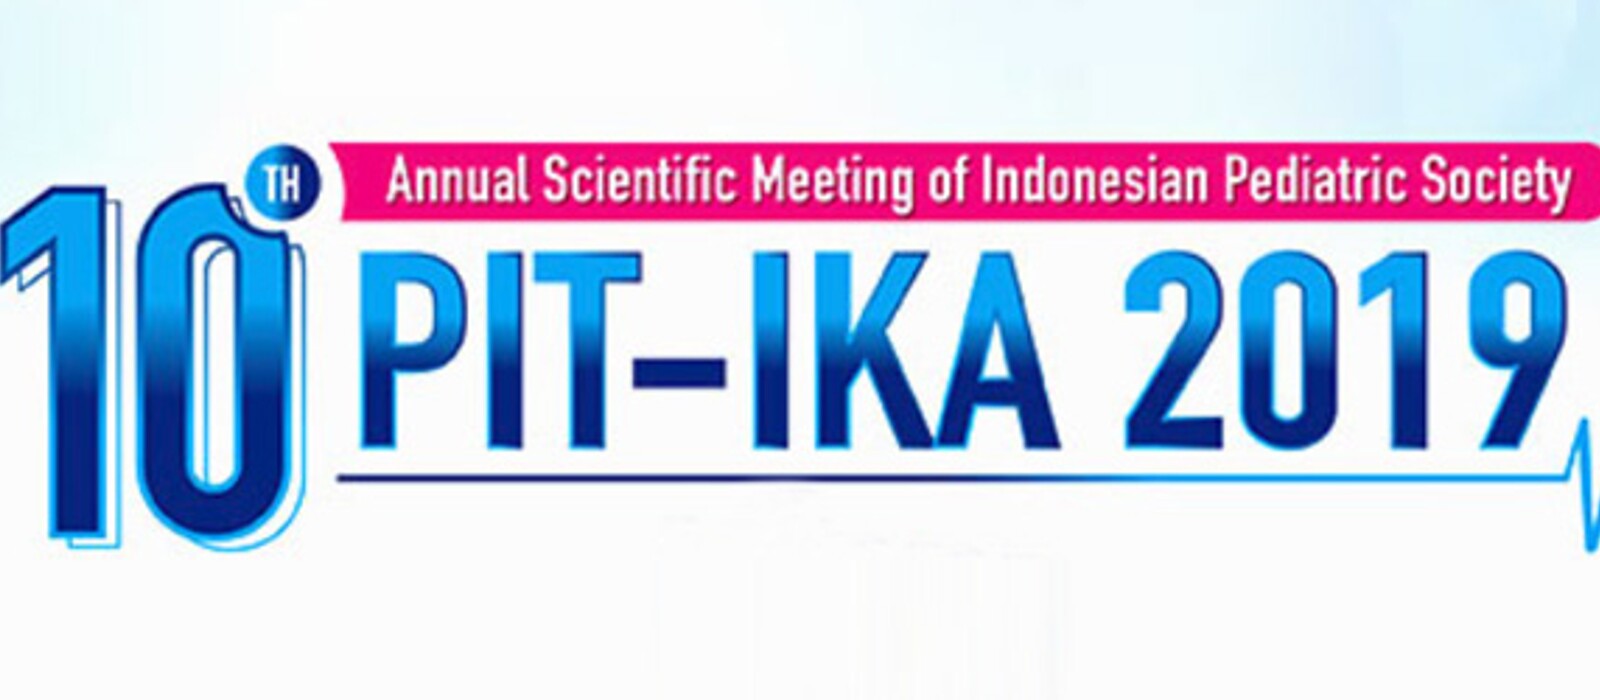 THE 10TH ANNUAL SCIENTIFIC MEETING OF INDONESIAN PEDIATRIC SOCIETY